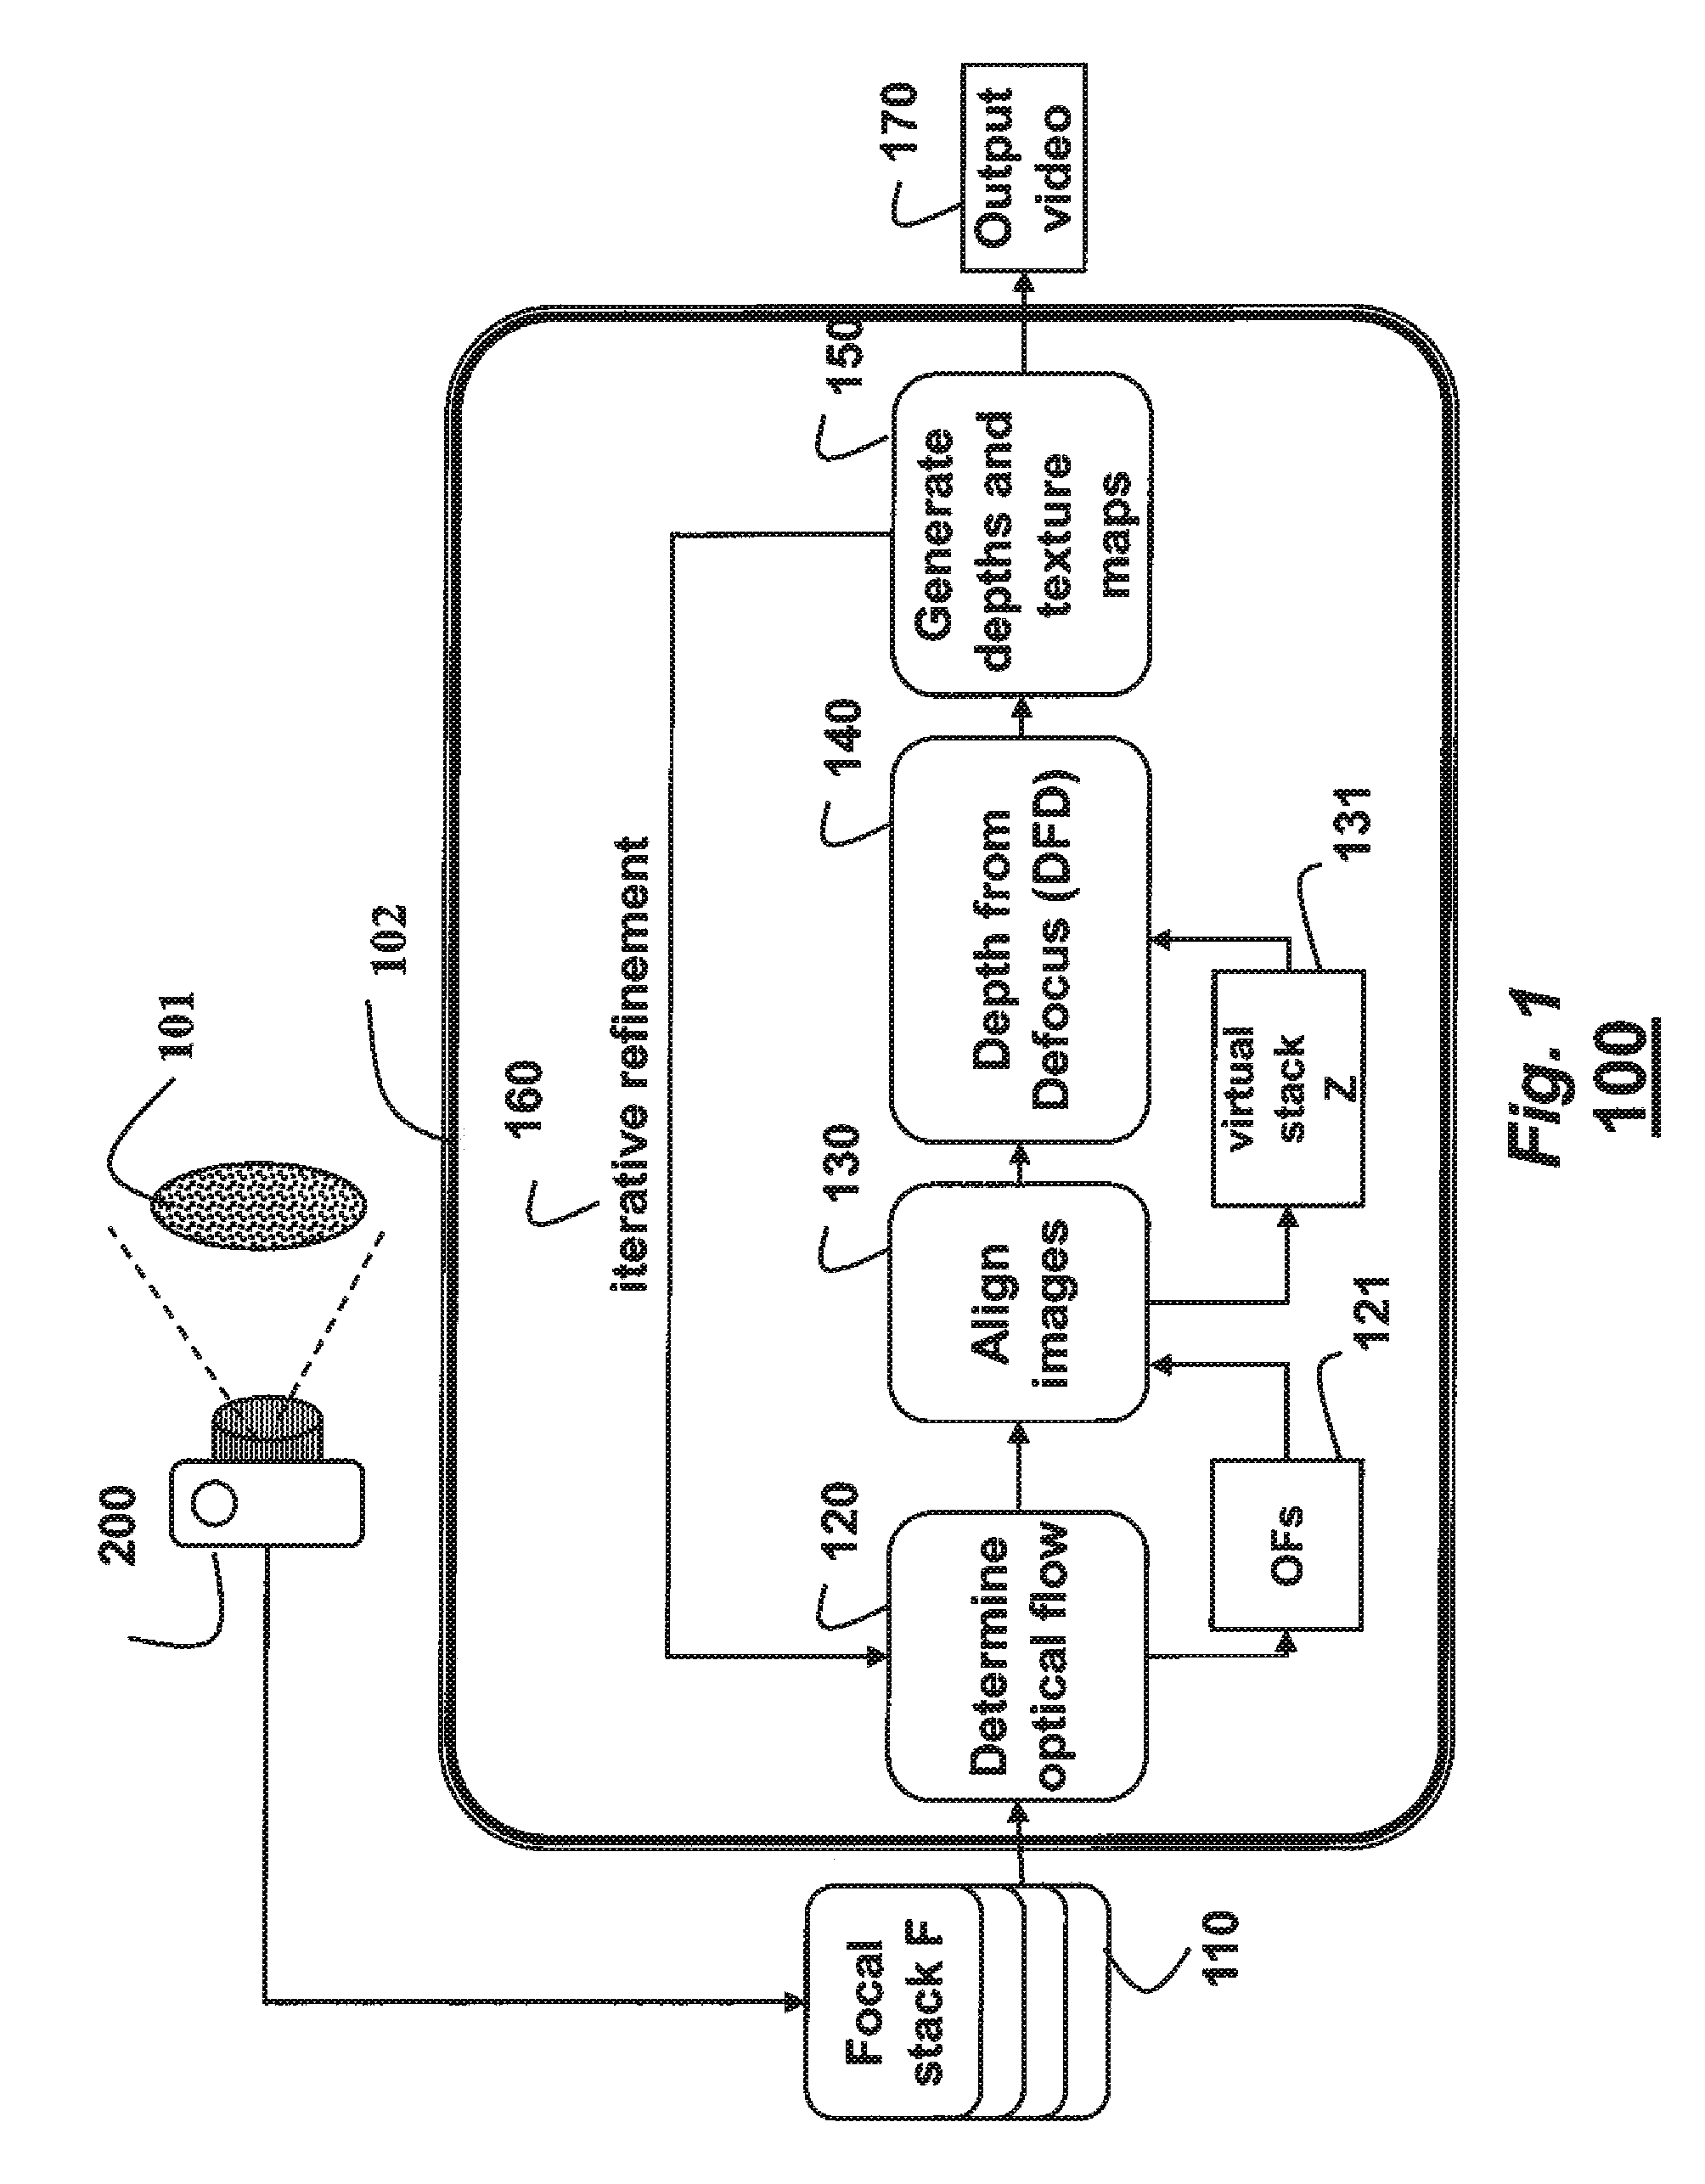 Camera and Method for Focus Based Depth Reconstruction of Dynamic Scenes